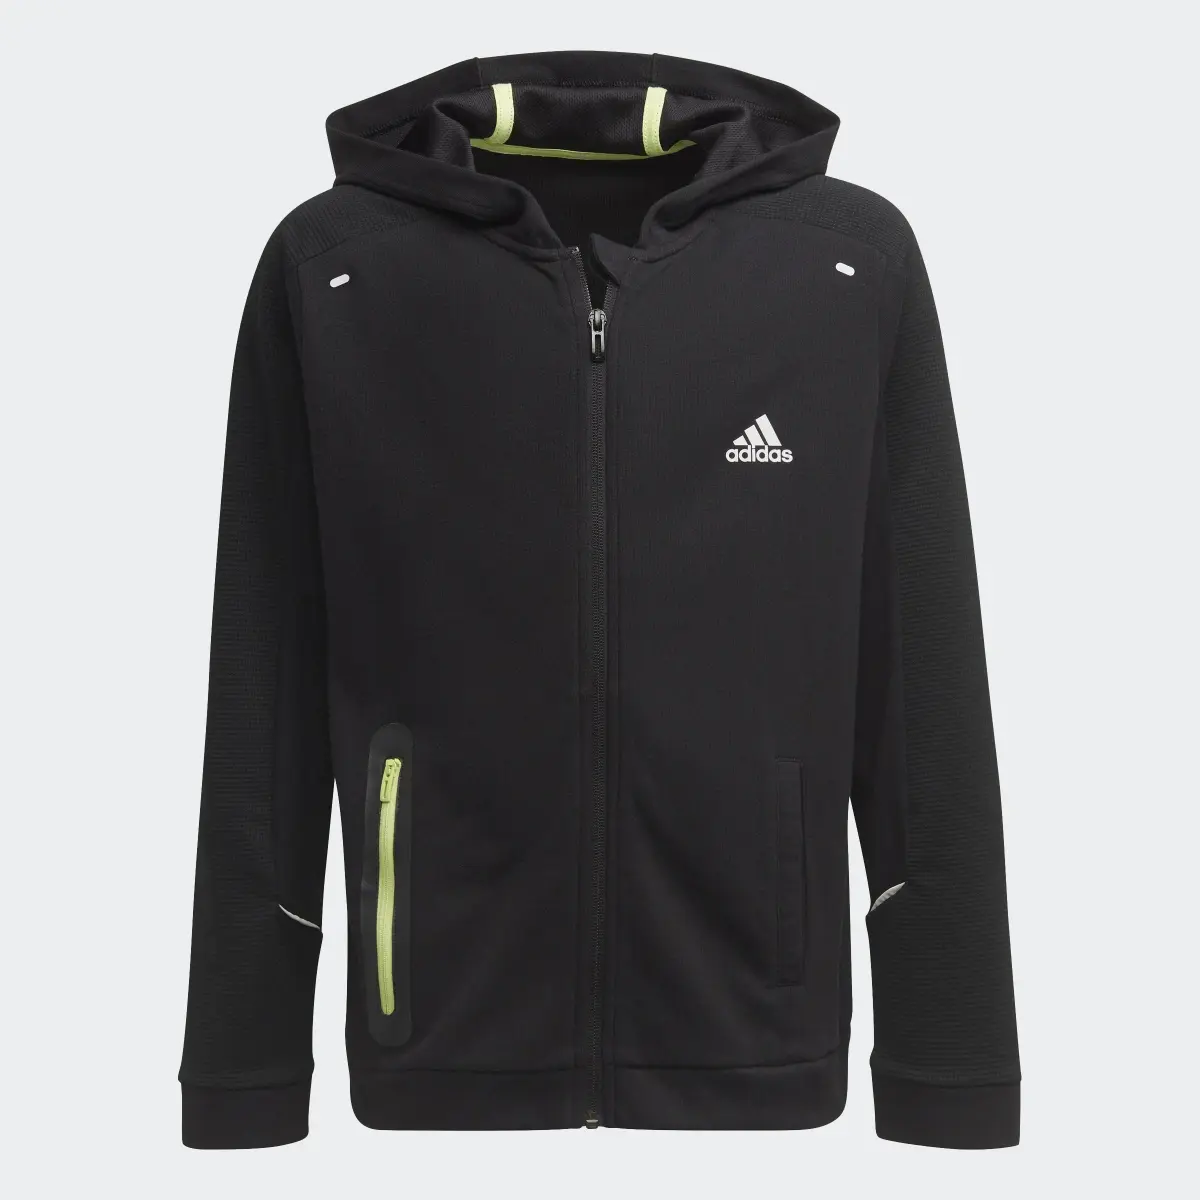 Adidas XFG Techy Inspired Summer Track Top. 1